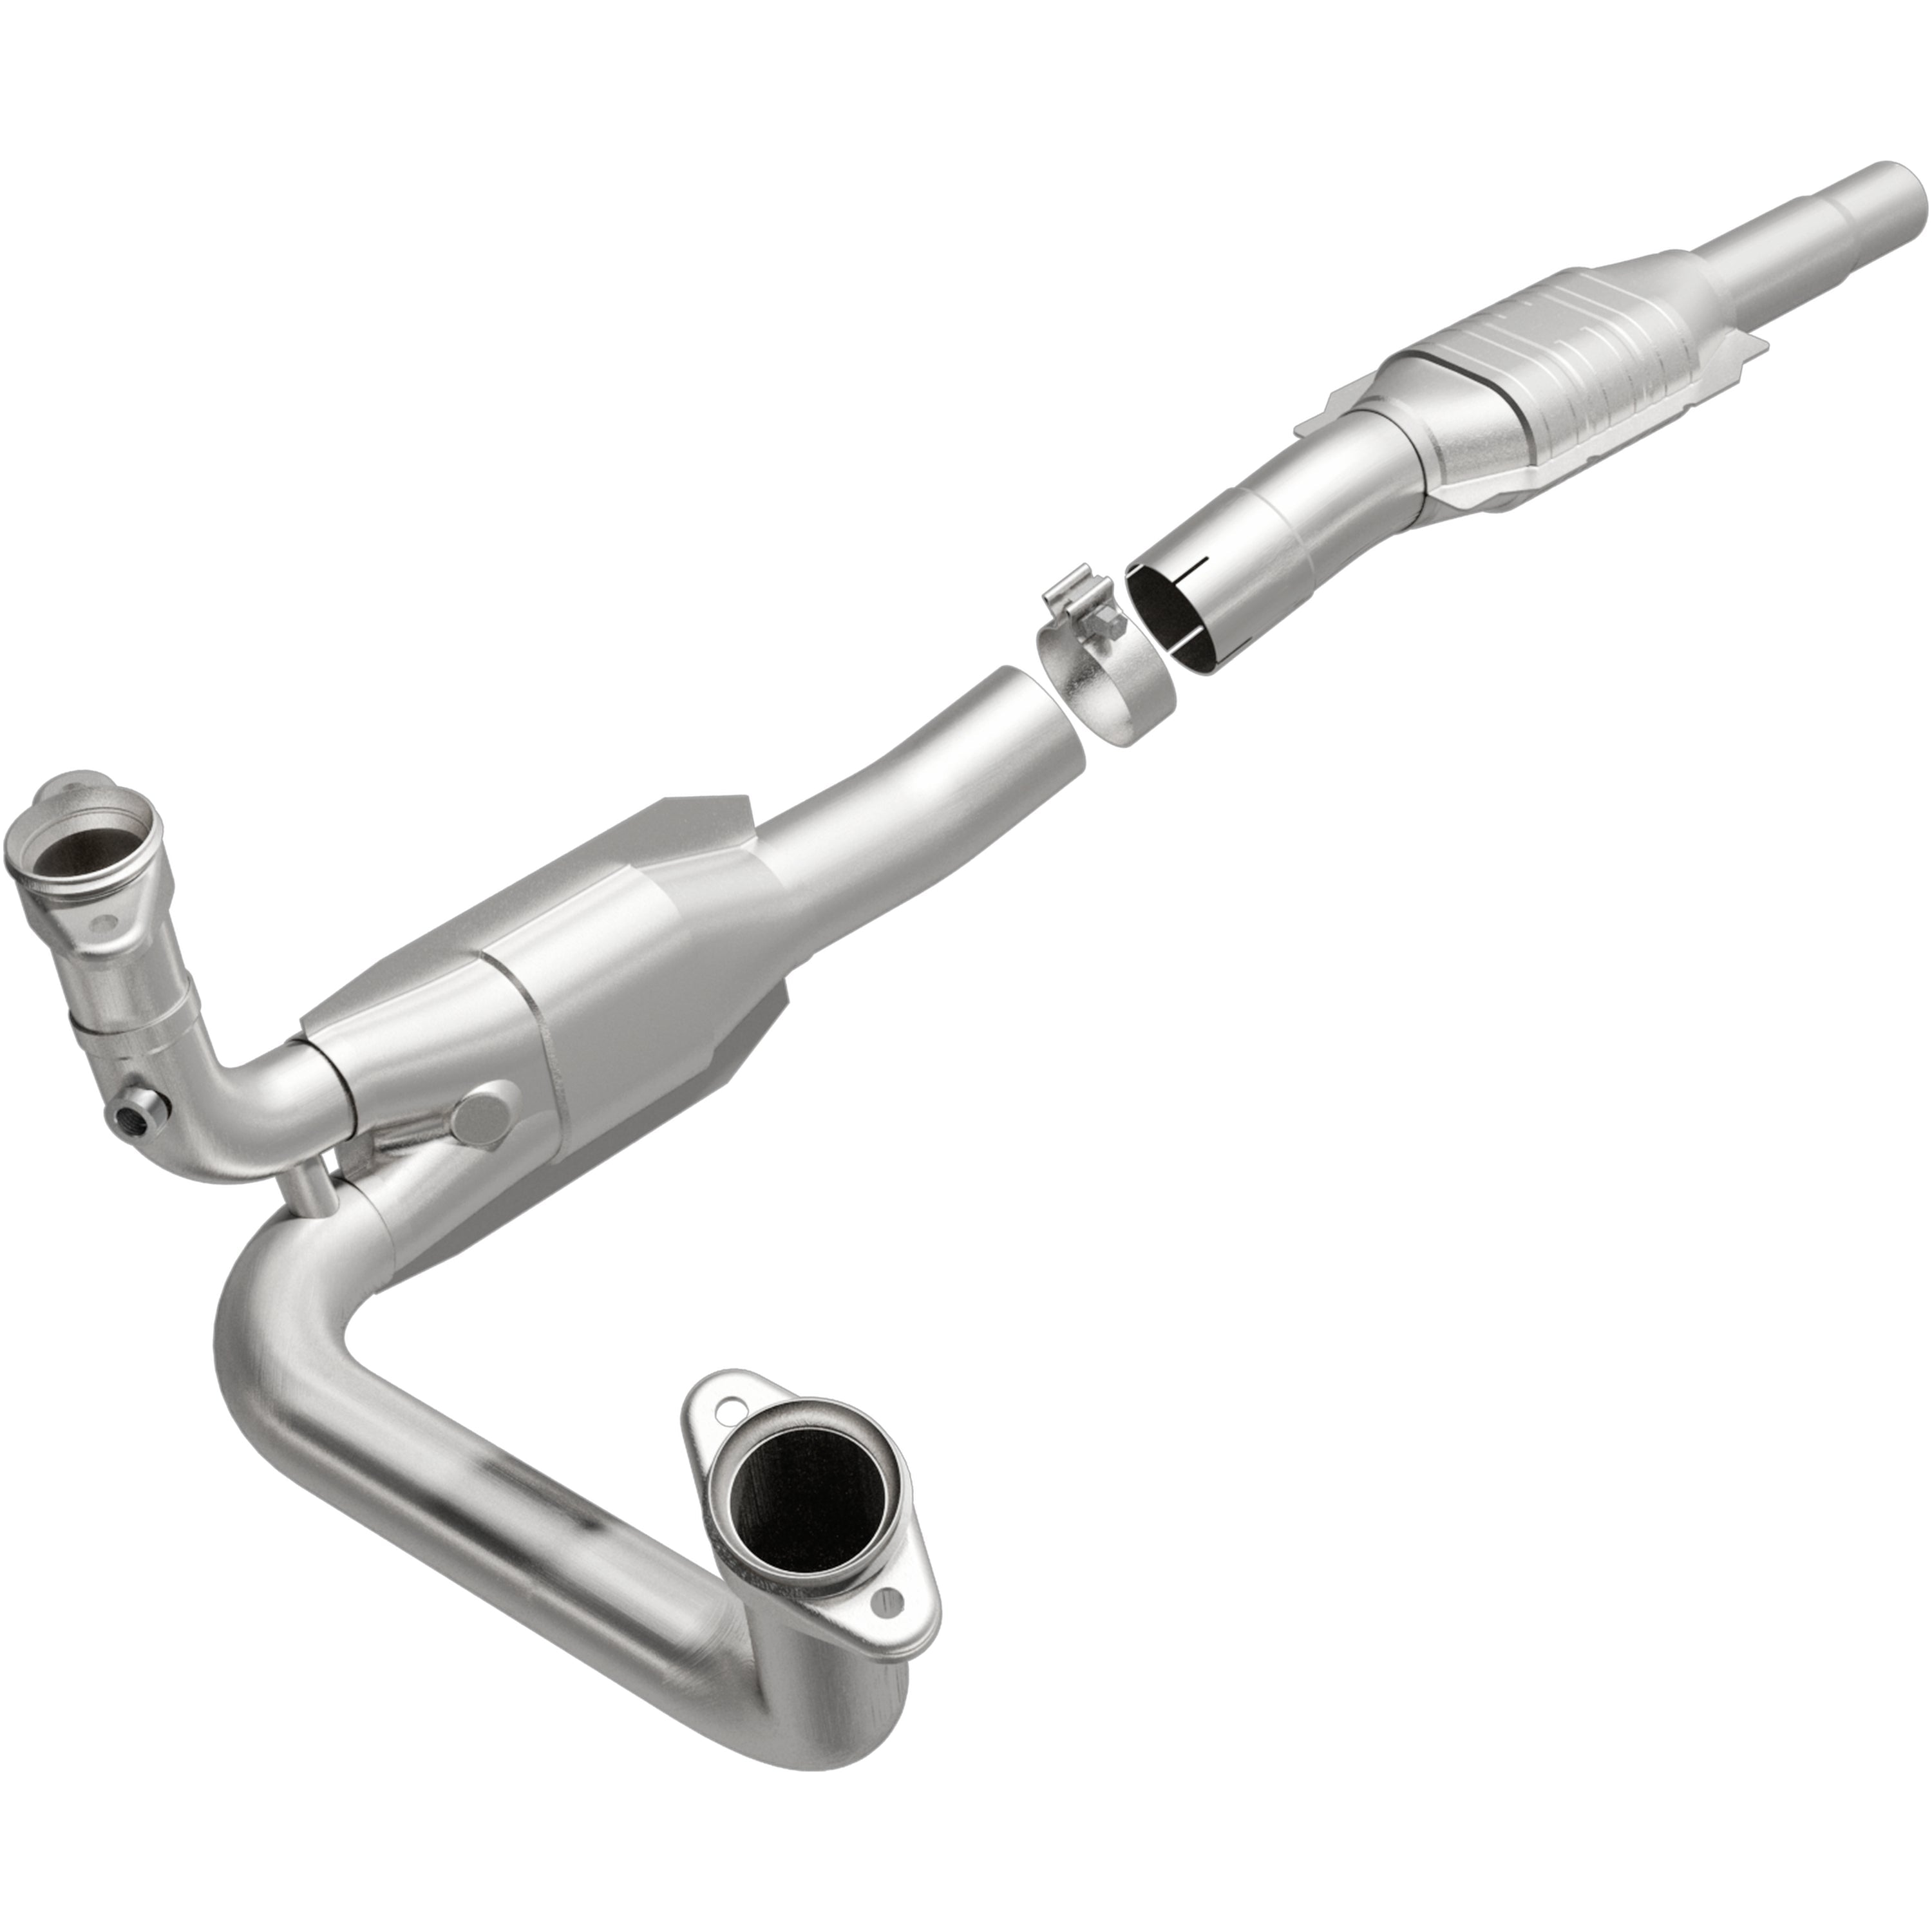 HM Grade Federal / EPA Compliant Direct-Fit Catalytic Converter <br>94-96 Ford Bronco 5.8L